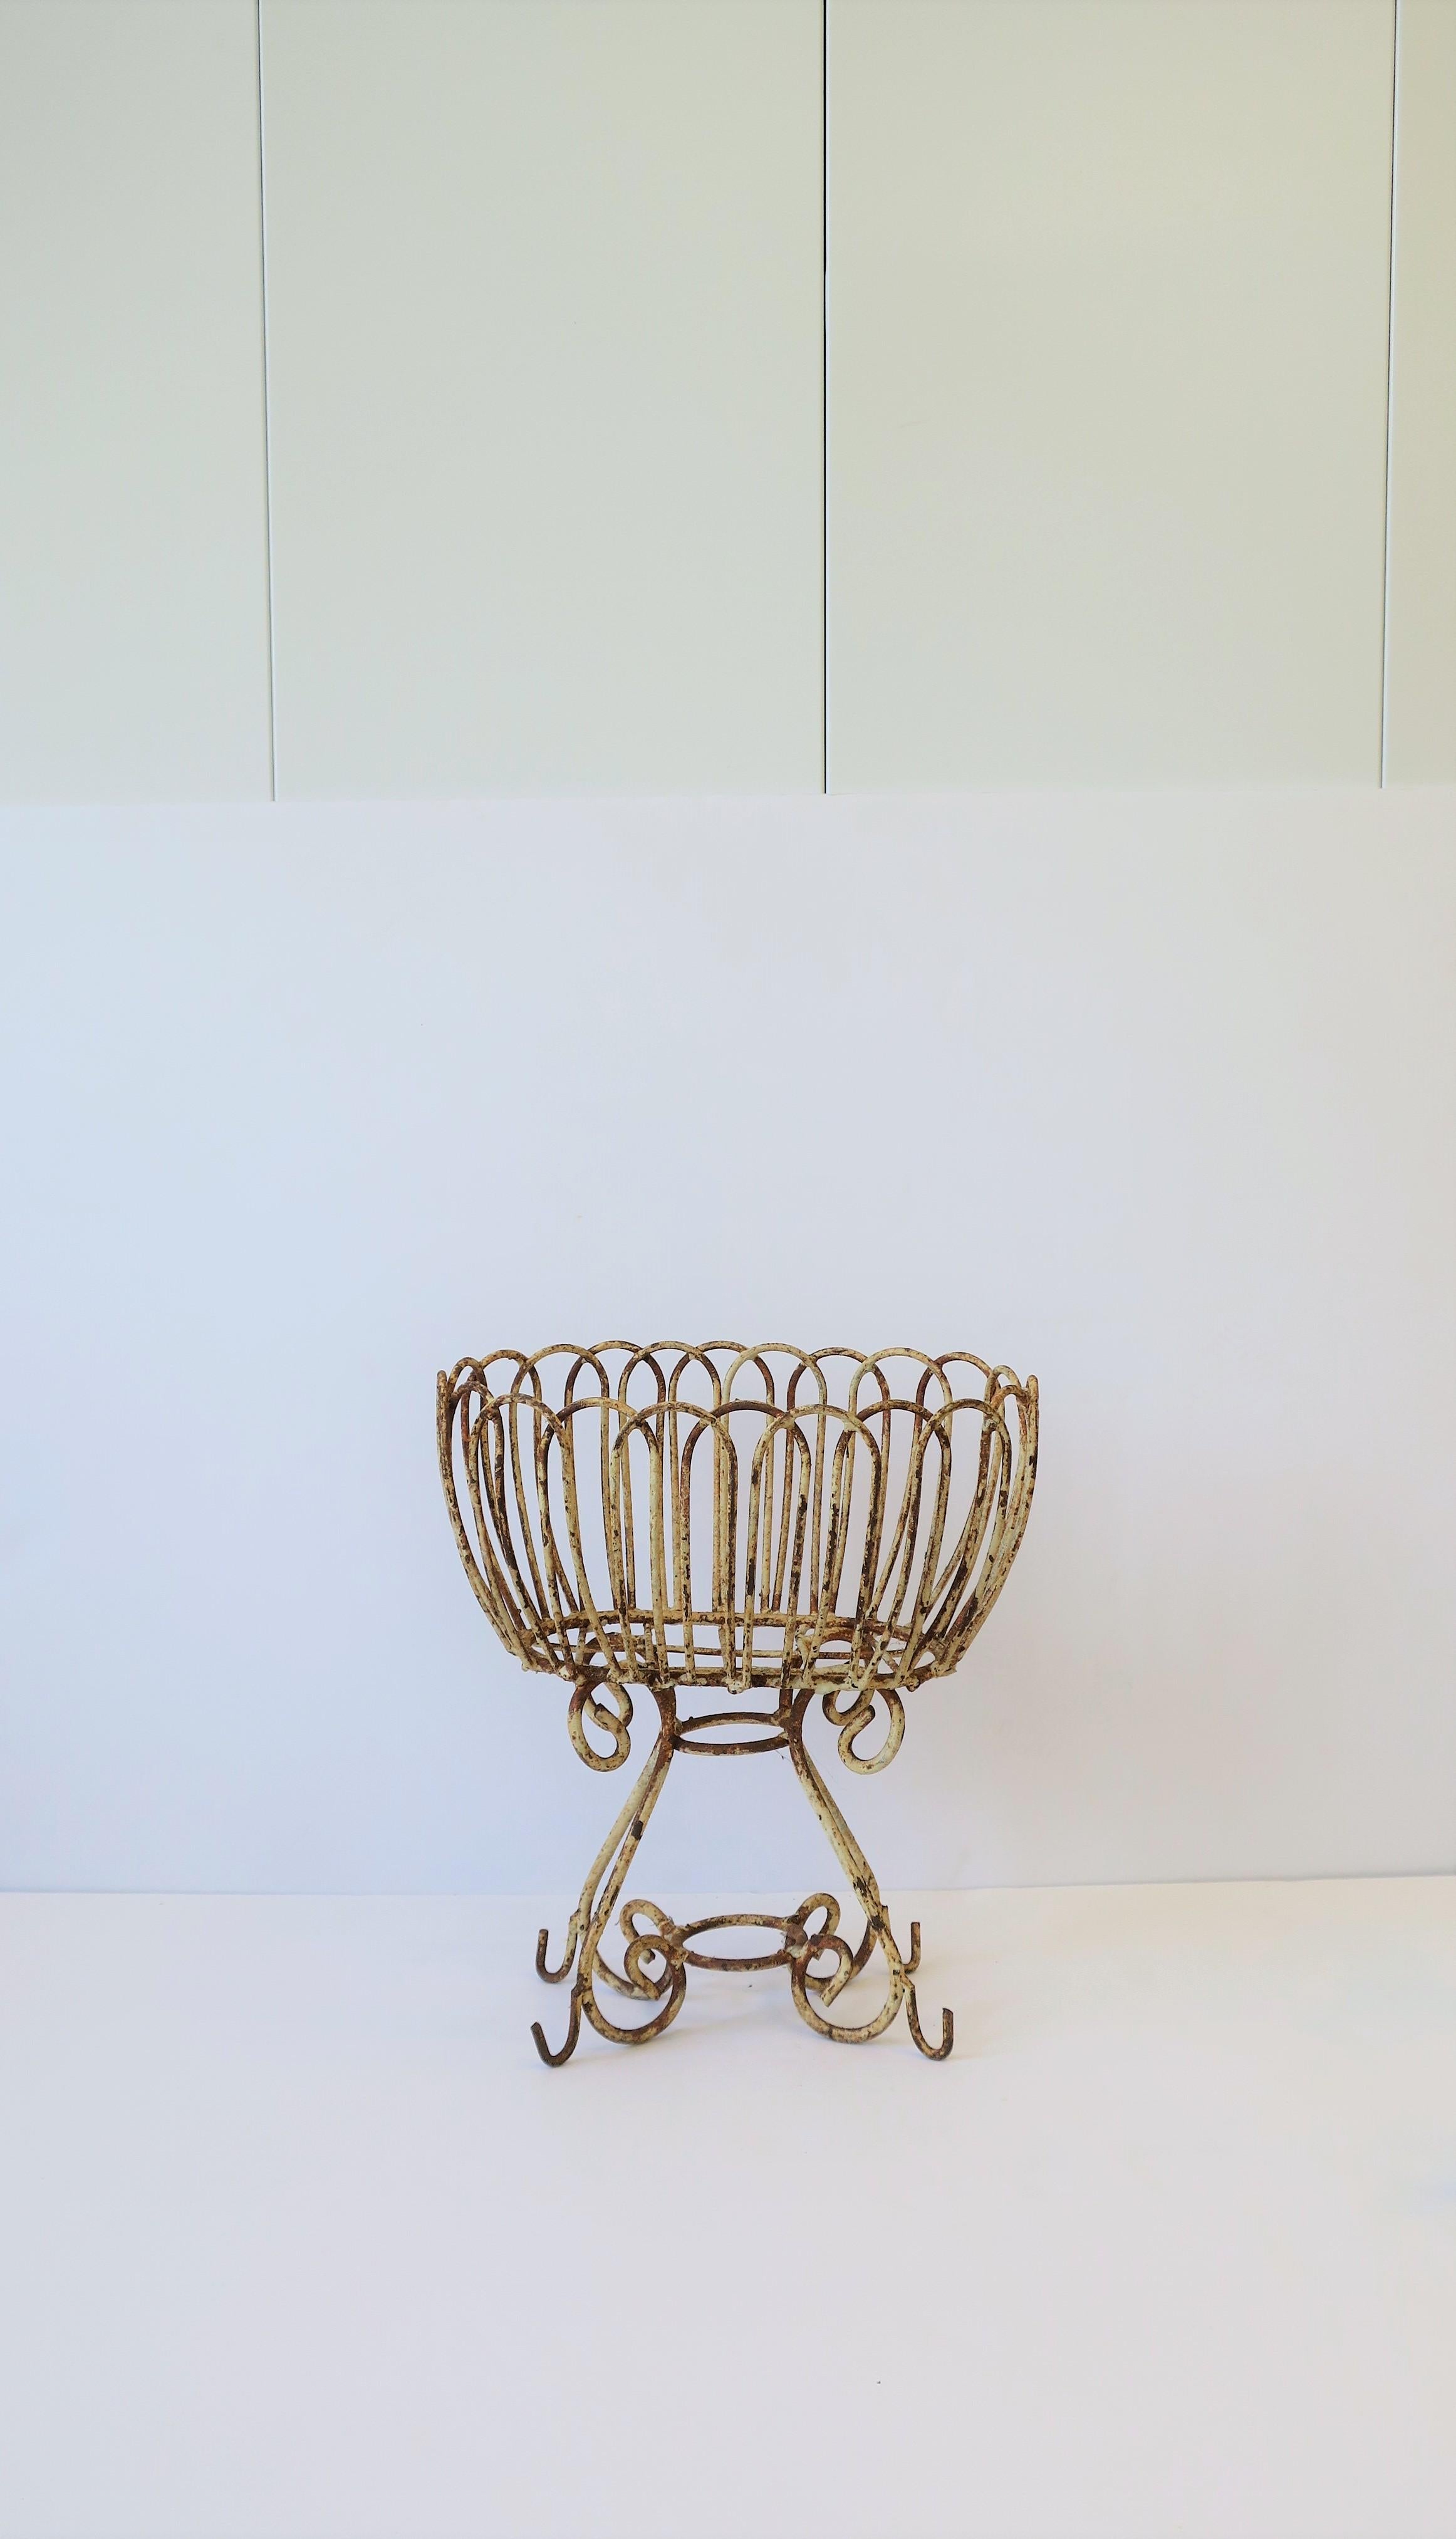 A beautiful antique white garden or patio planter jardinière, circa early 20th century, France. Iron metal wire frame is beautifully designed and decorated with loop and scroll details. Piece can be used indoors or outdoors. Piece is shown with an